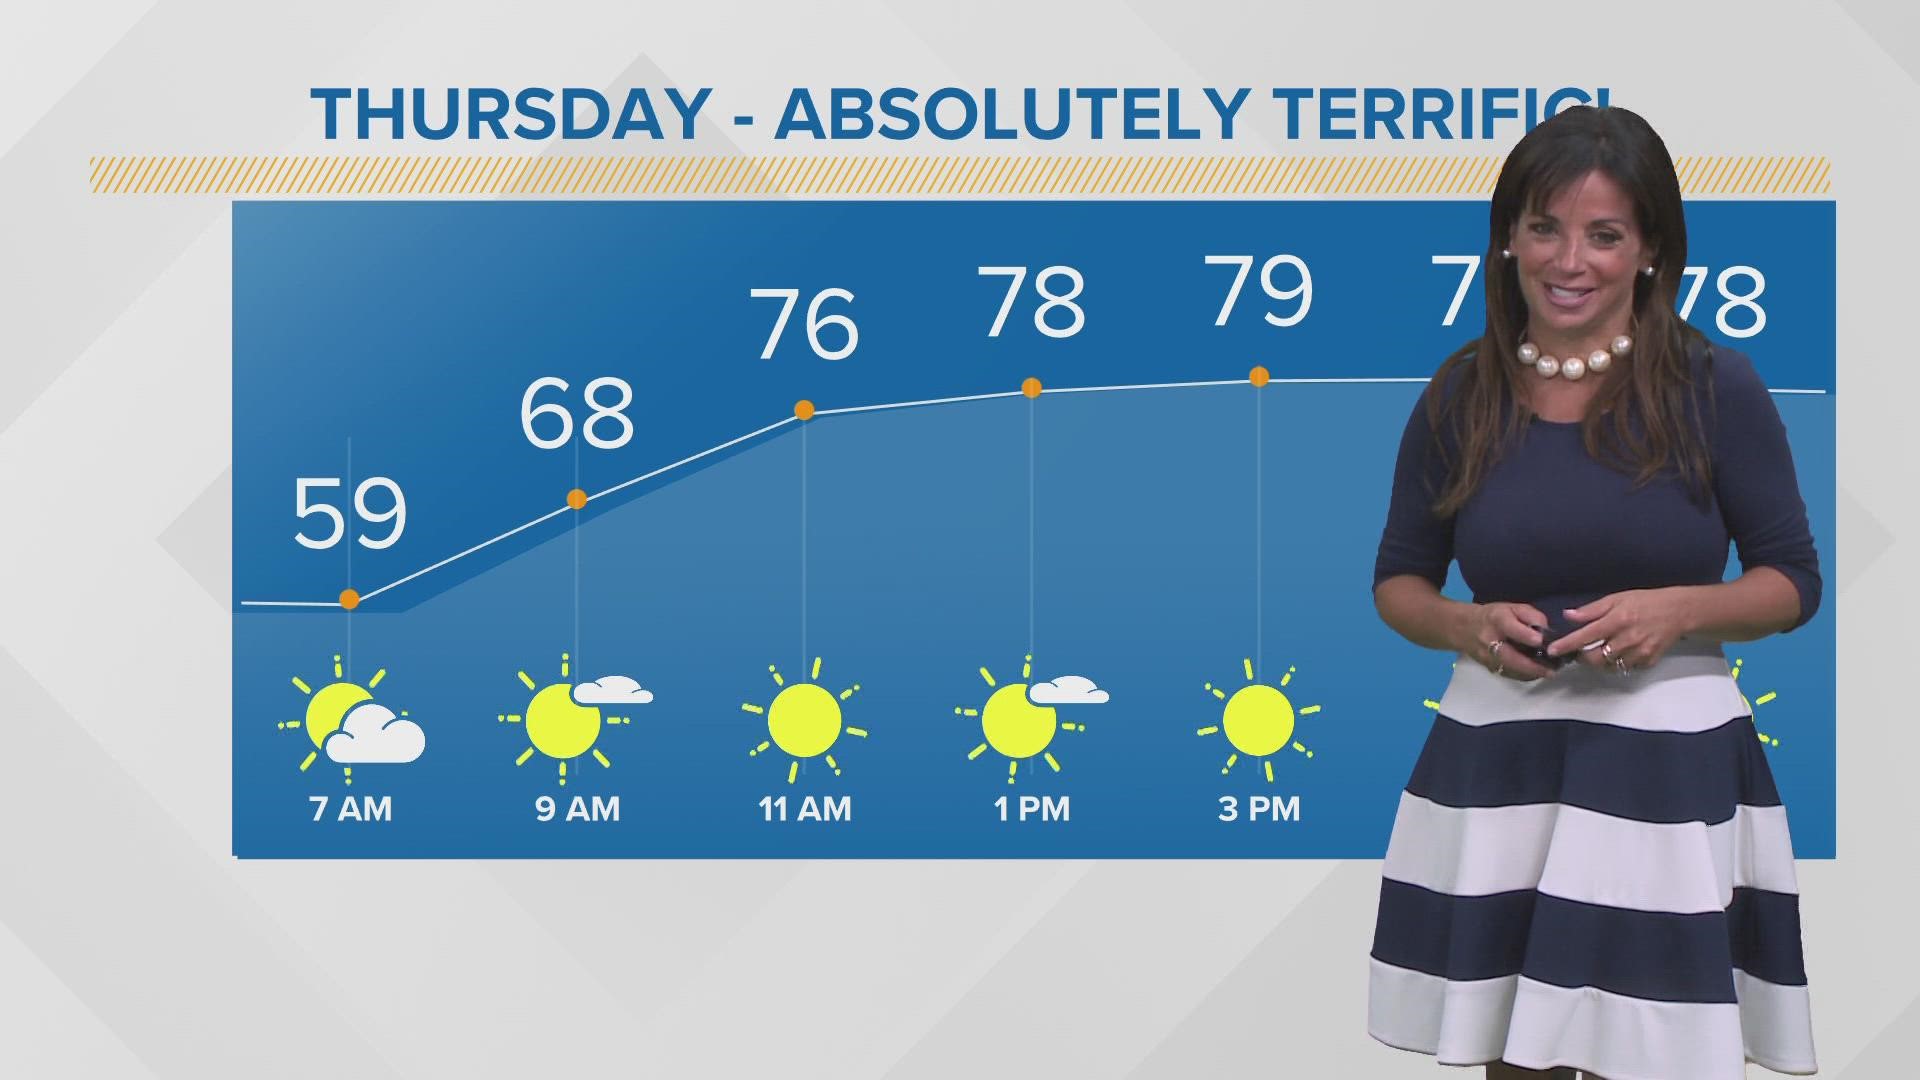 We have more sunshine and warmer temperatures today. 3News' Hollie Strano has the hour-by-hour details in her morning weather forecast for Thursday, August 18, 2022.